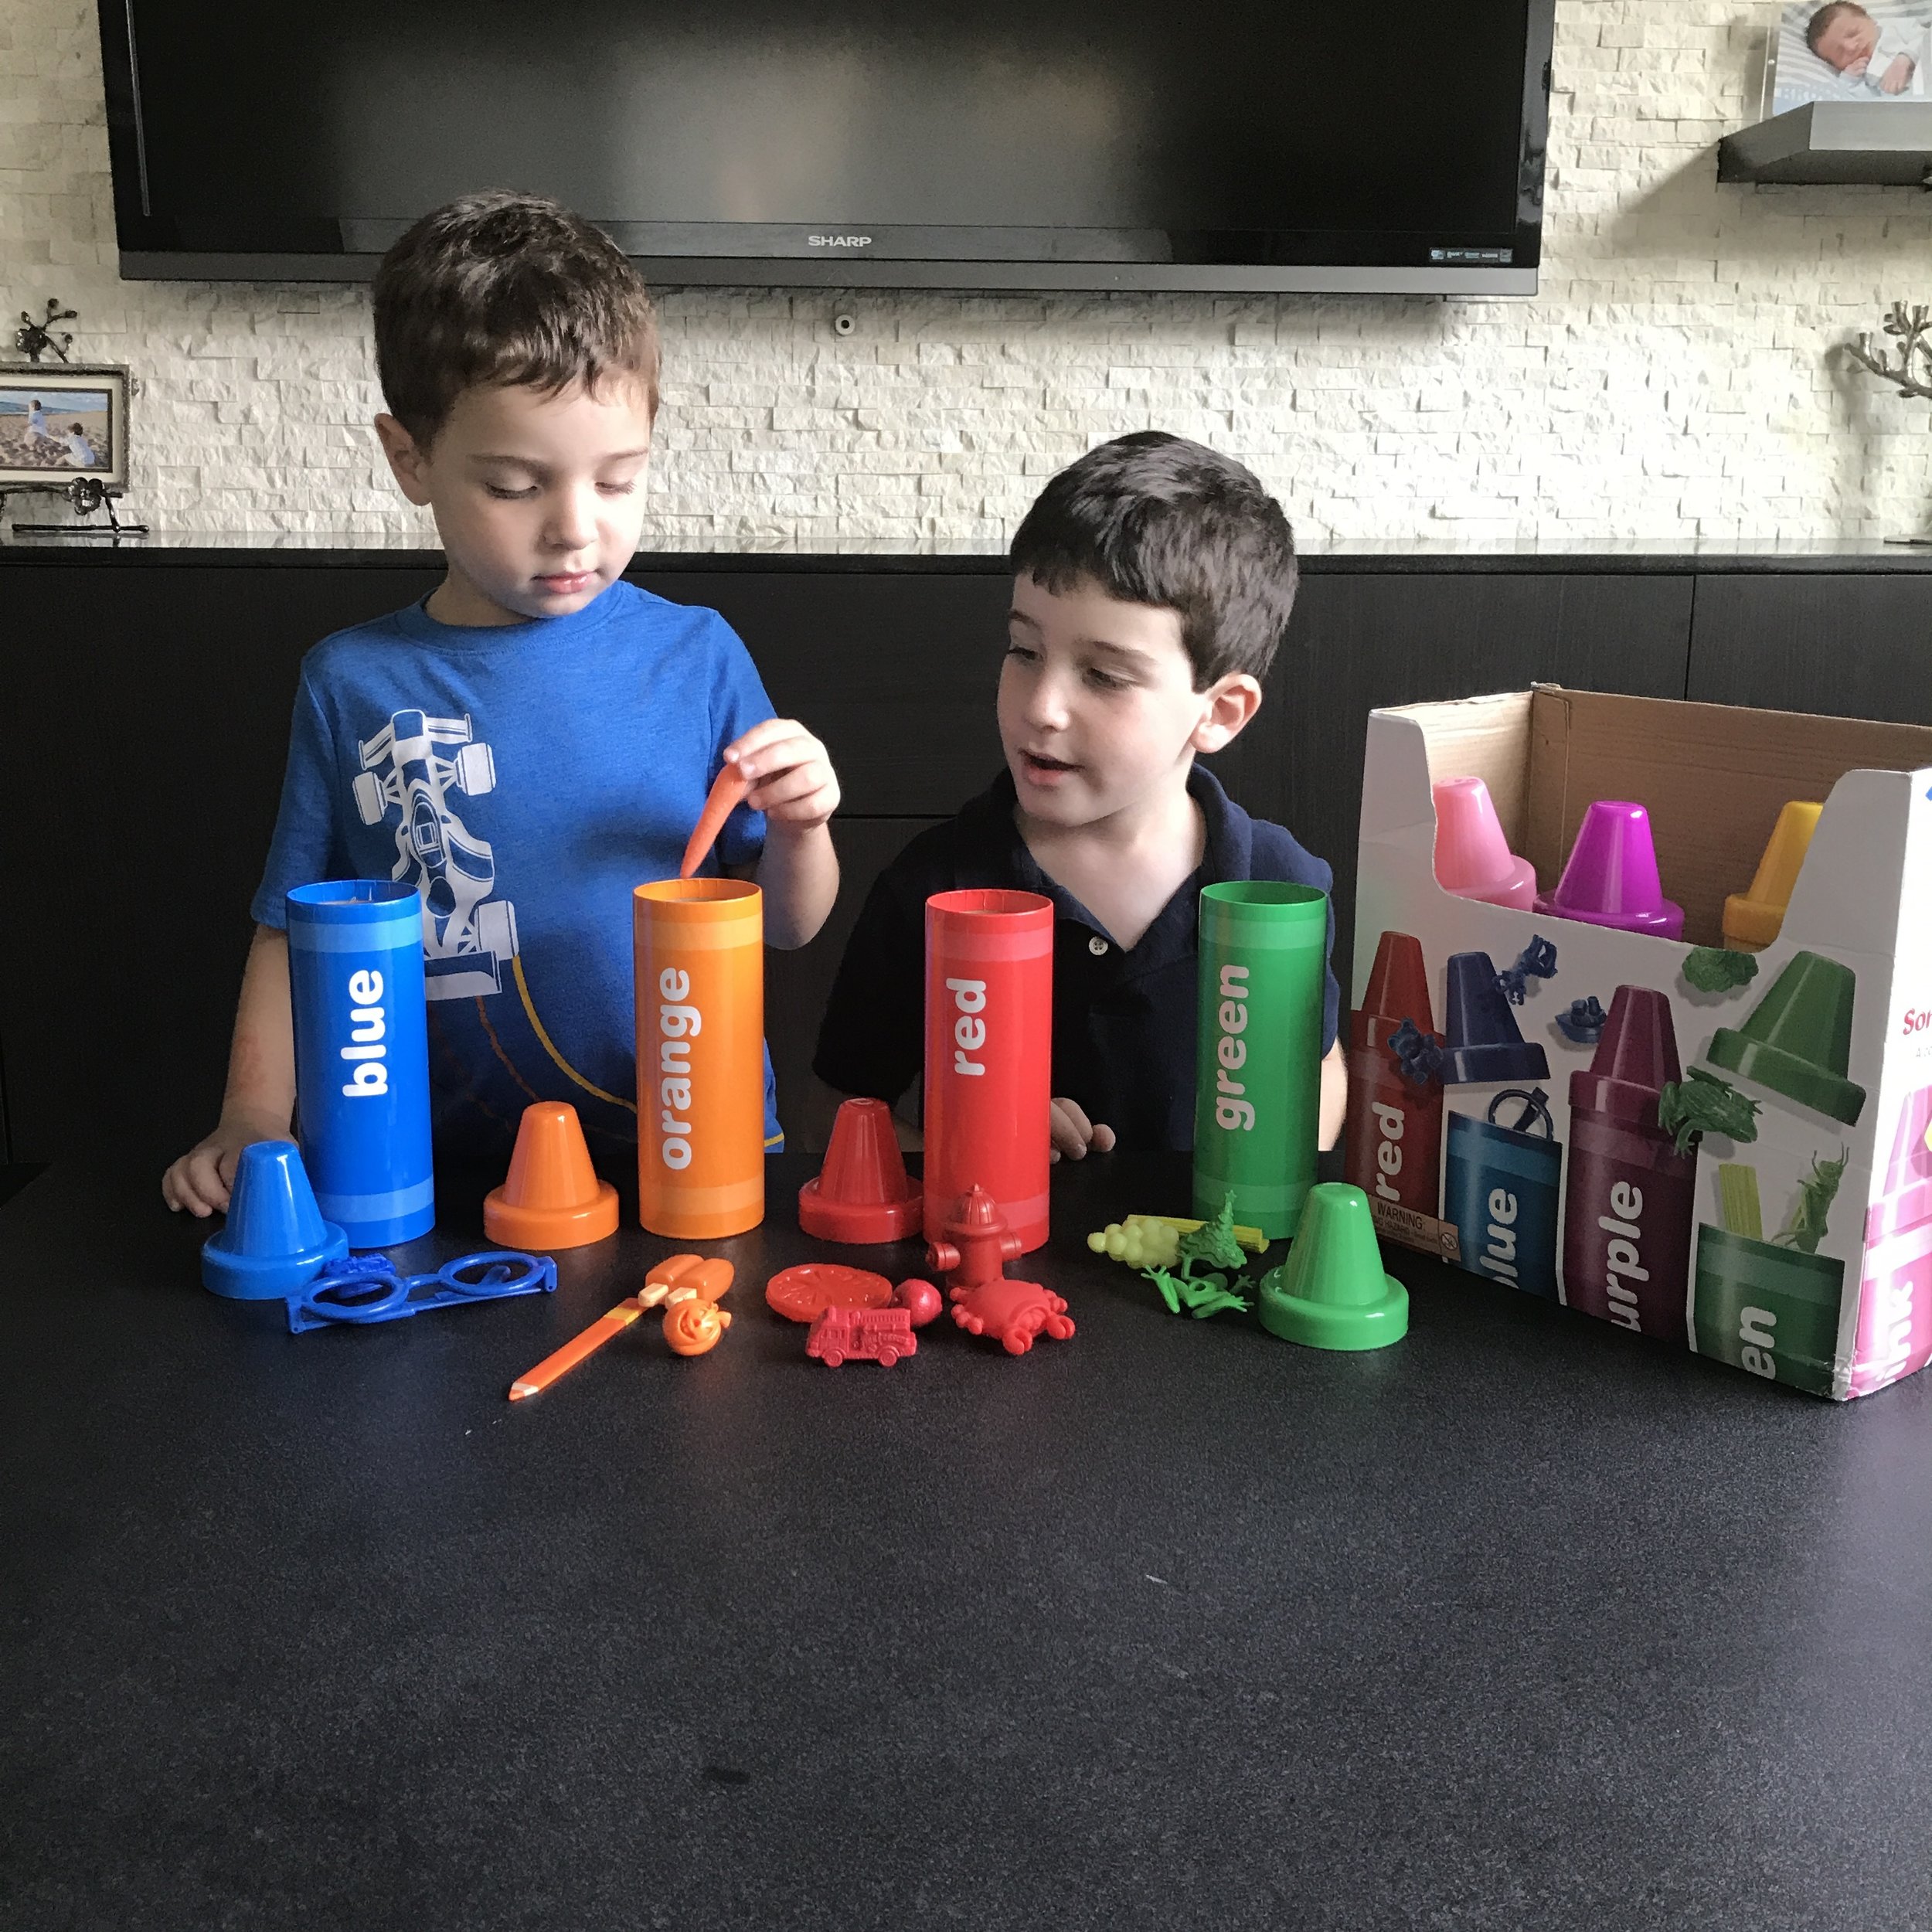 Toys As Tools Educational Toy Reviews: Review + Giveaway: Crayon